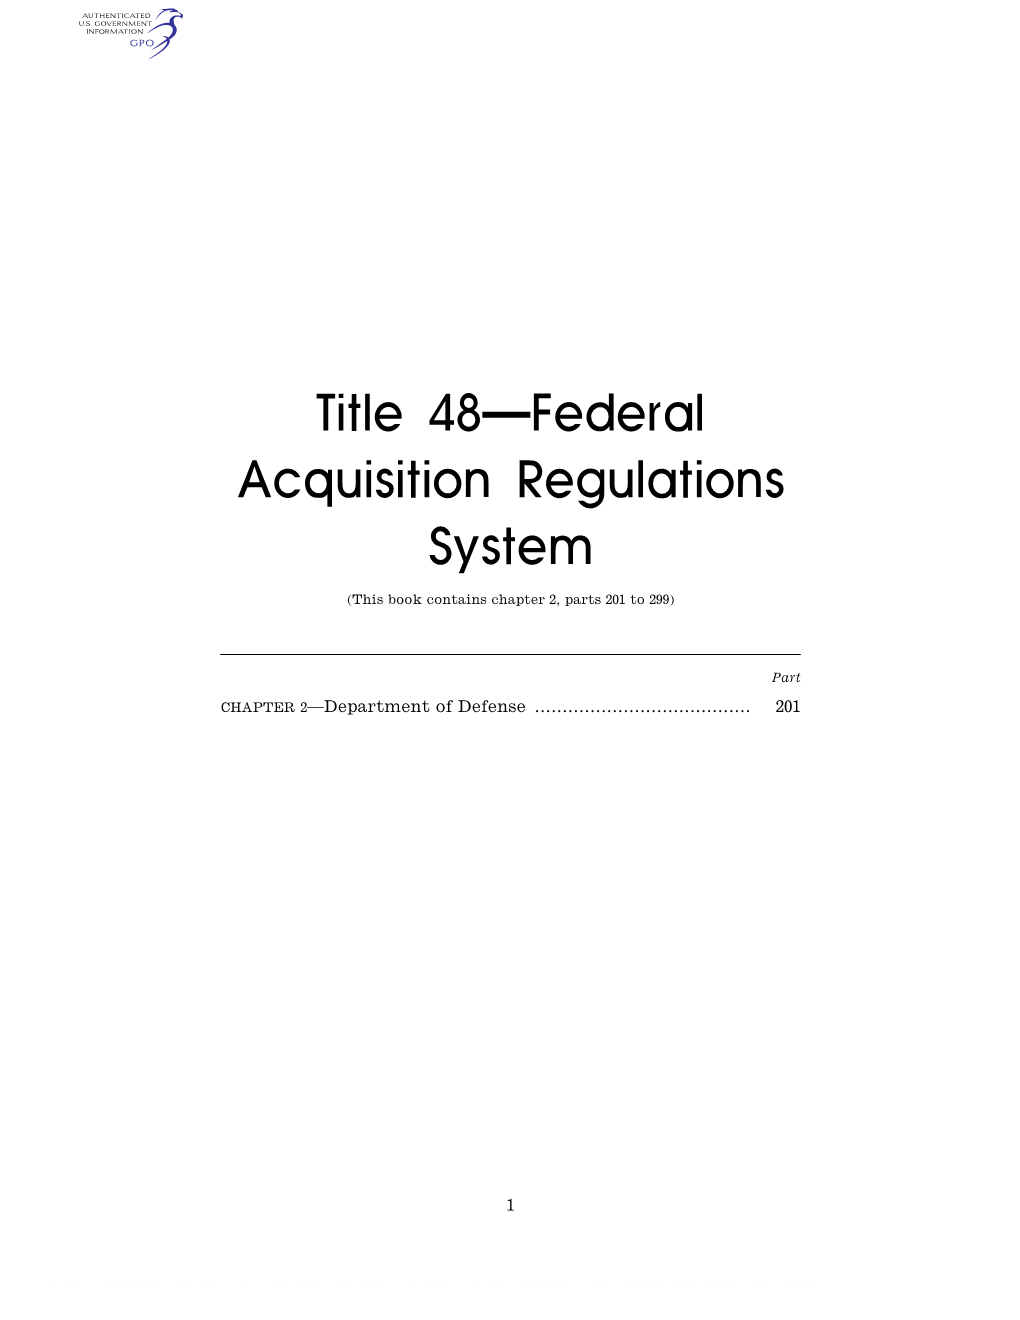 Title 48—Federal Acquisition Regulations System